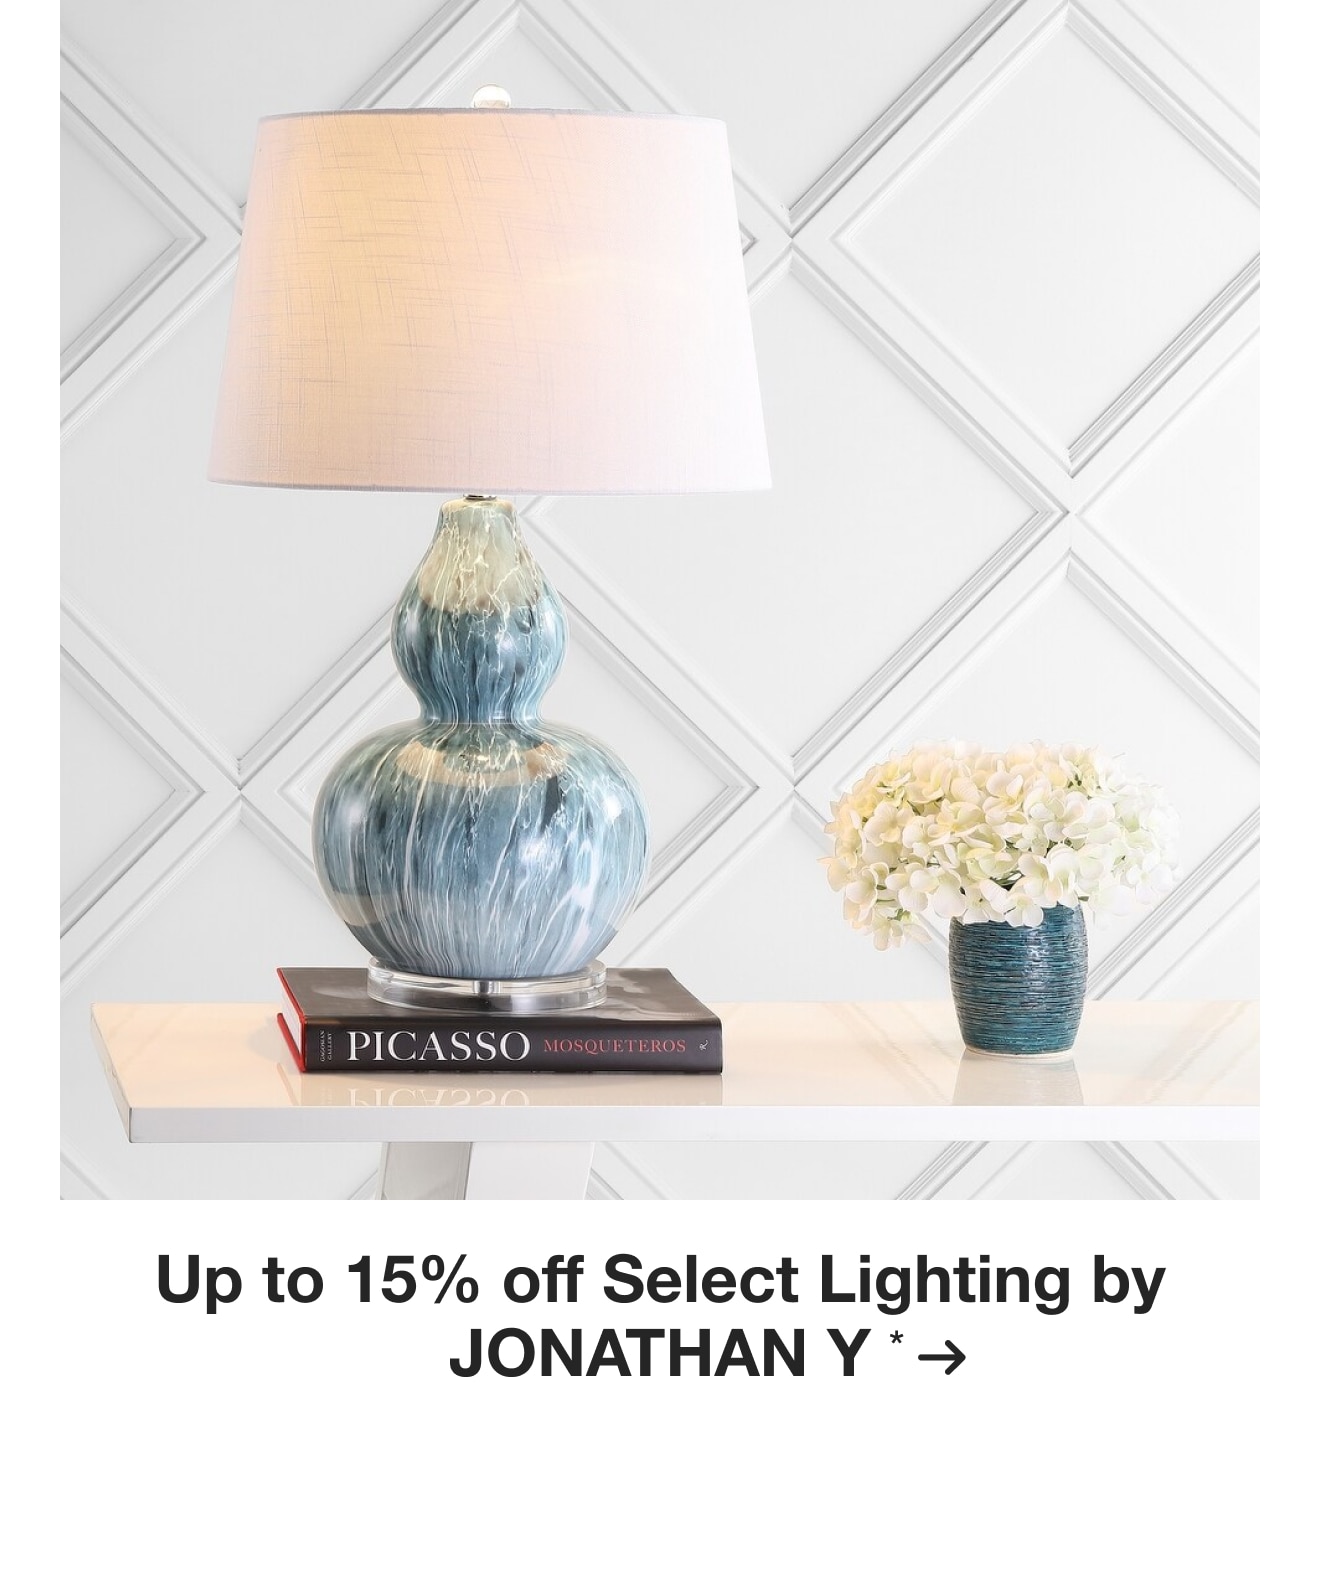 Up to 15% off Select Lighting by JONATHAN Y*